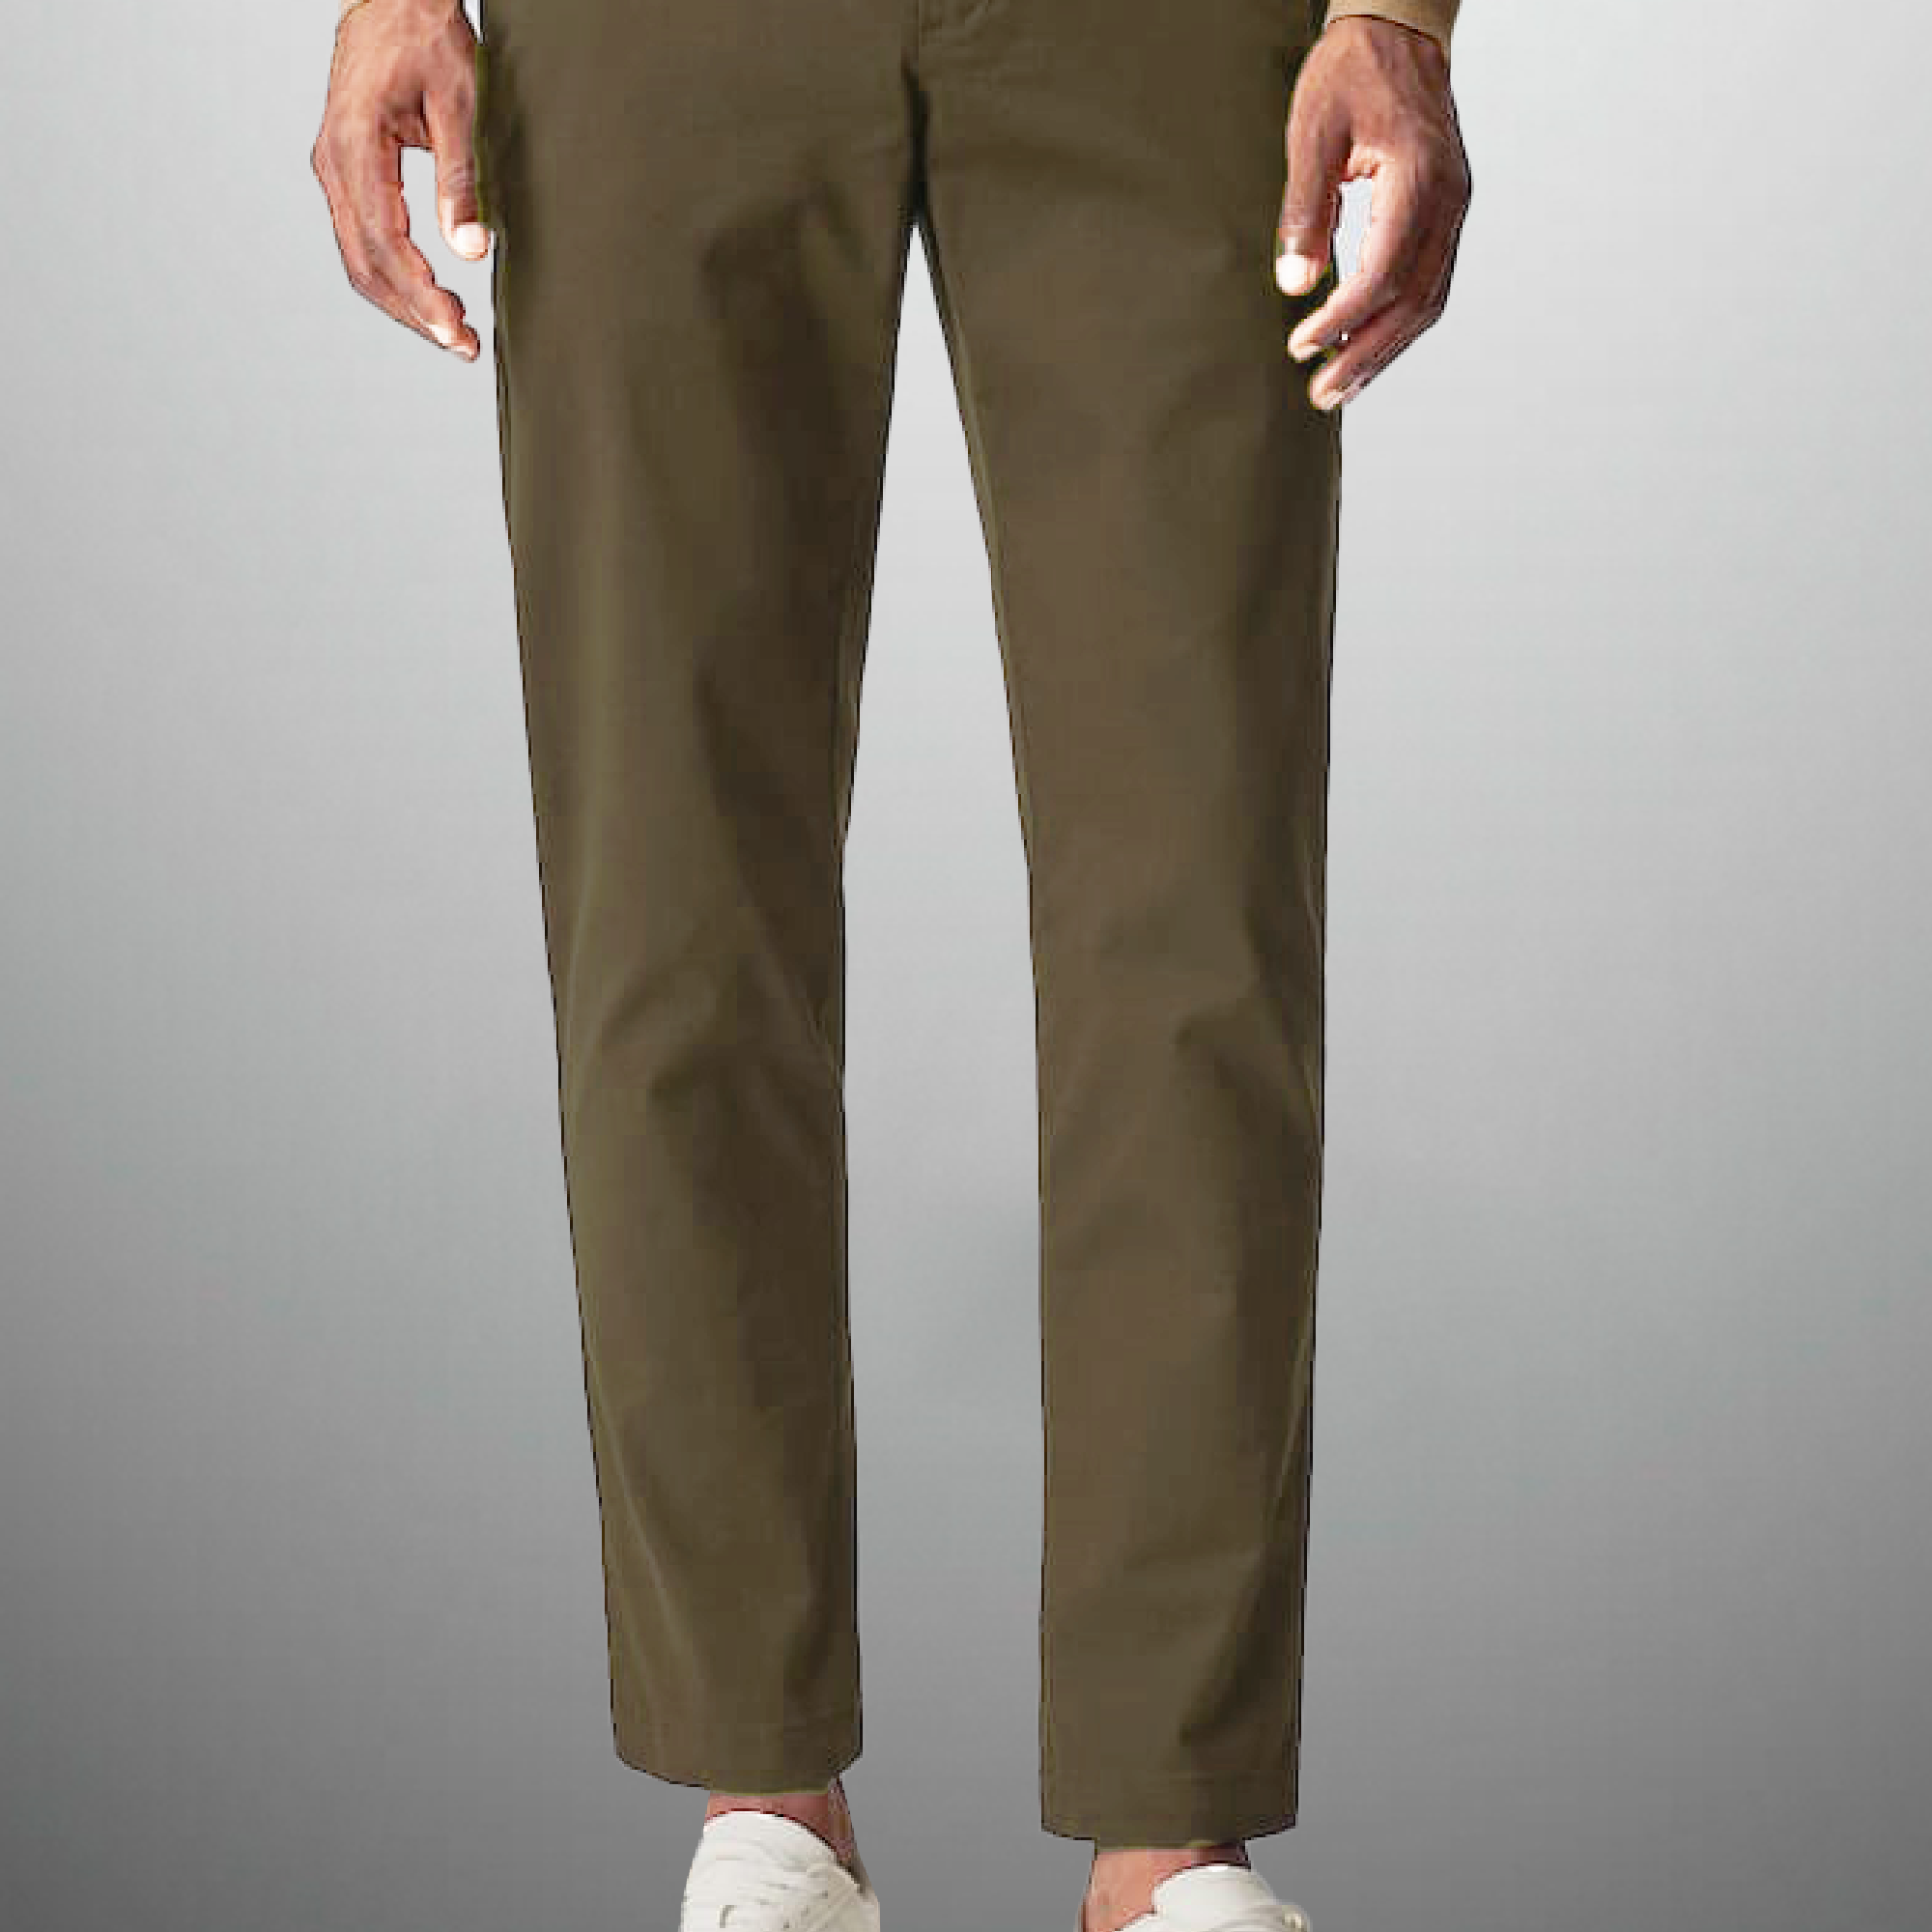 Men's Smoky Green Ankle length Straight Pant-RMT005